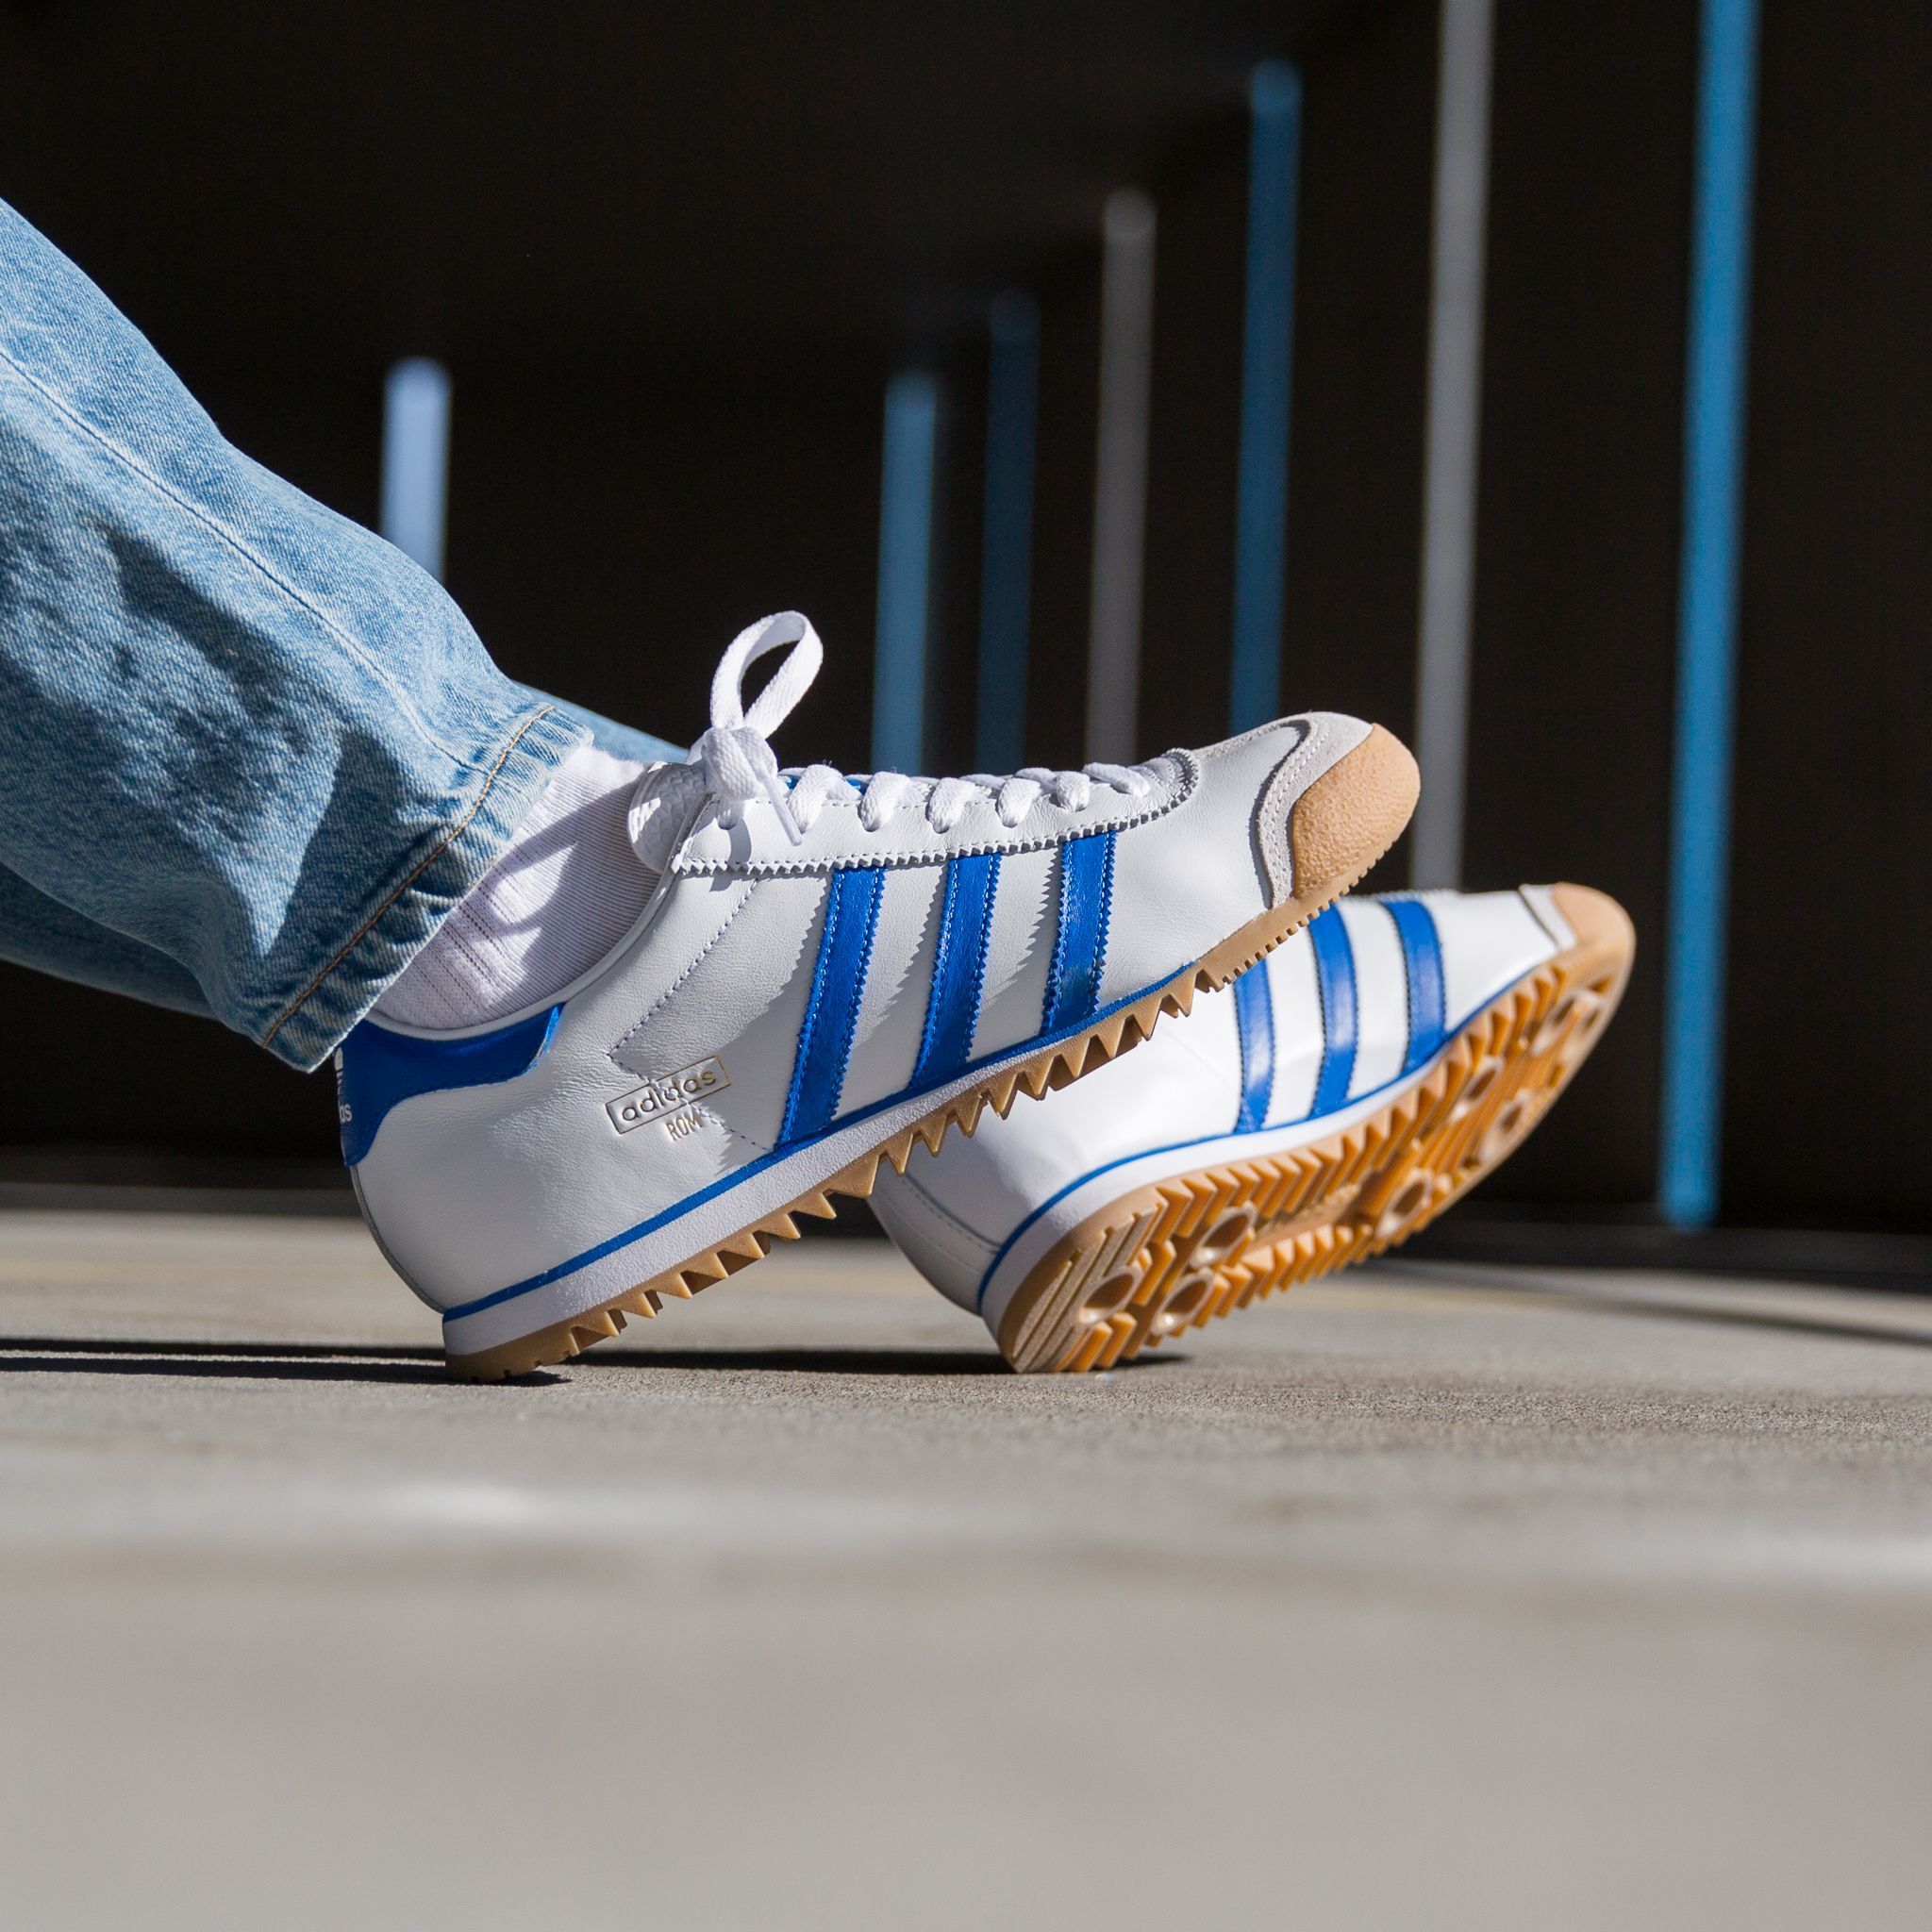 Titolo on Twitter: "OUT NOW 🔥 Adidas Rom ⚪️🔵 Here ➡️  https://t.co/Hos61u5oKD #adidas #adidasrom #rom #adidasoriginals  https://t.co/jDL2sQ9qjG" / Twitter